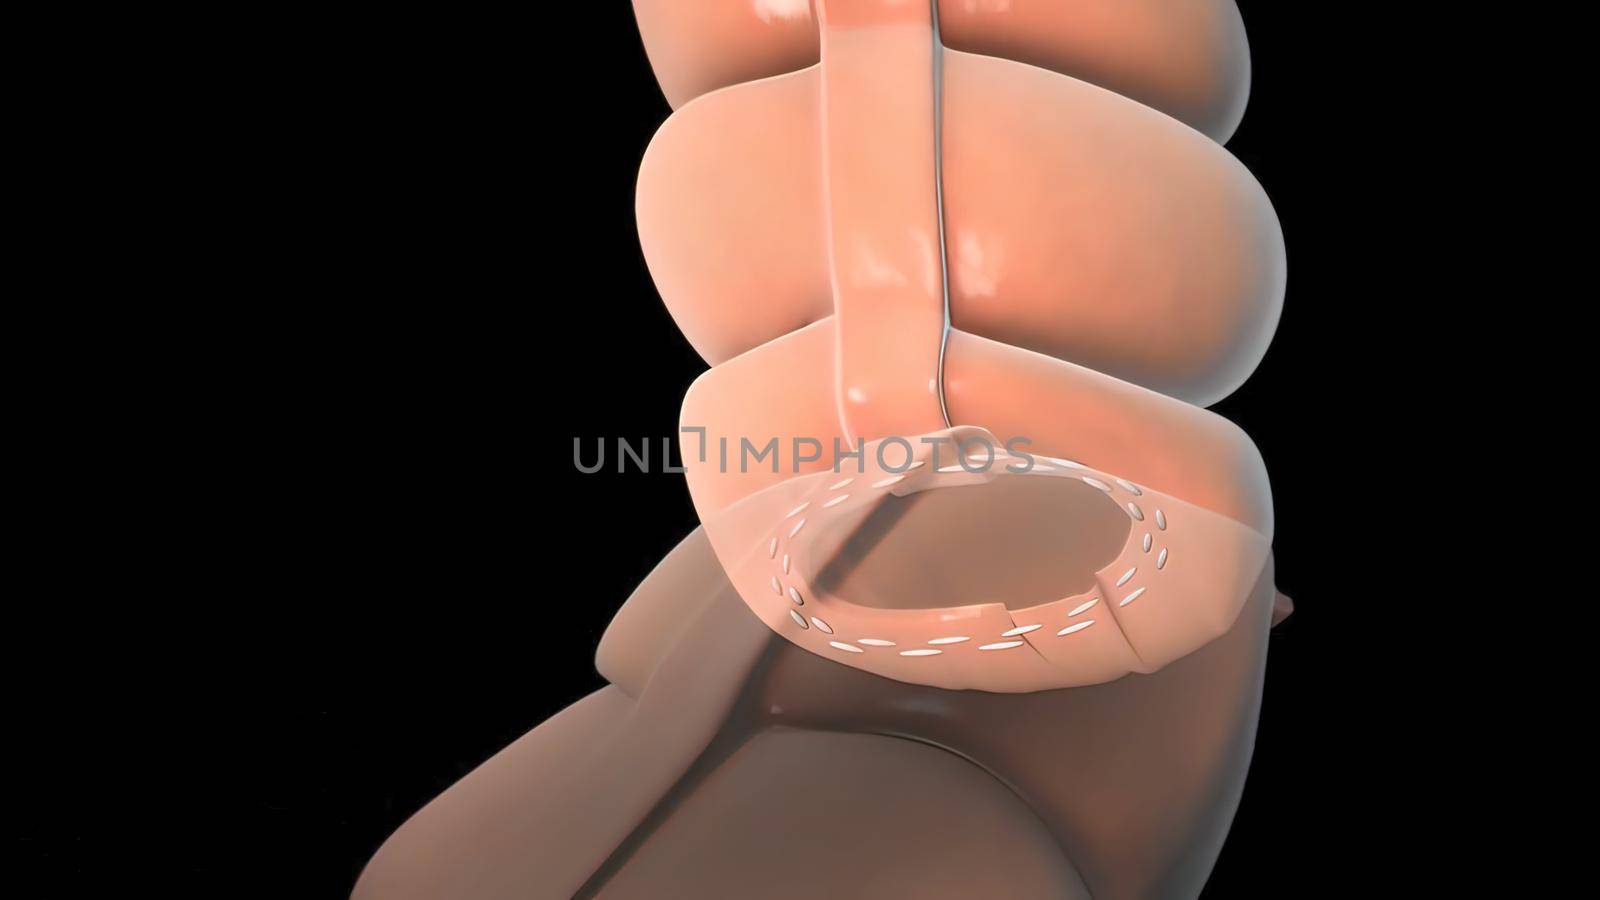 surgery to remove any part of the intestines, bowel resection by creativepic